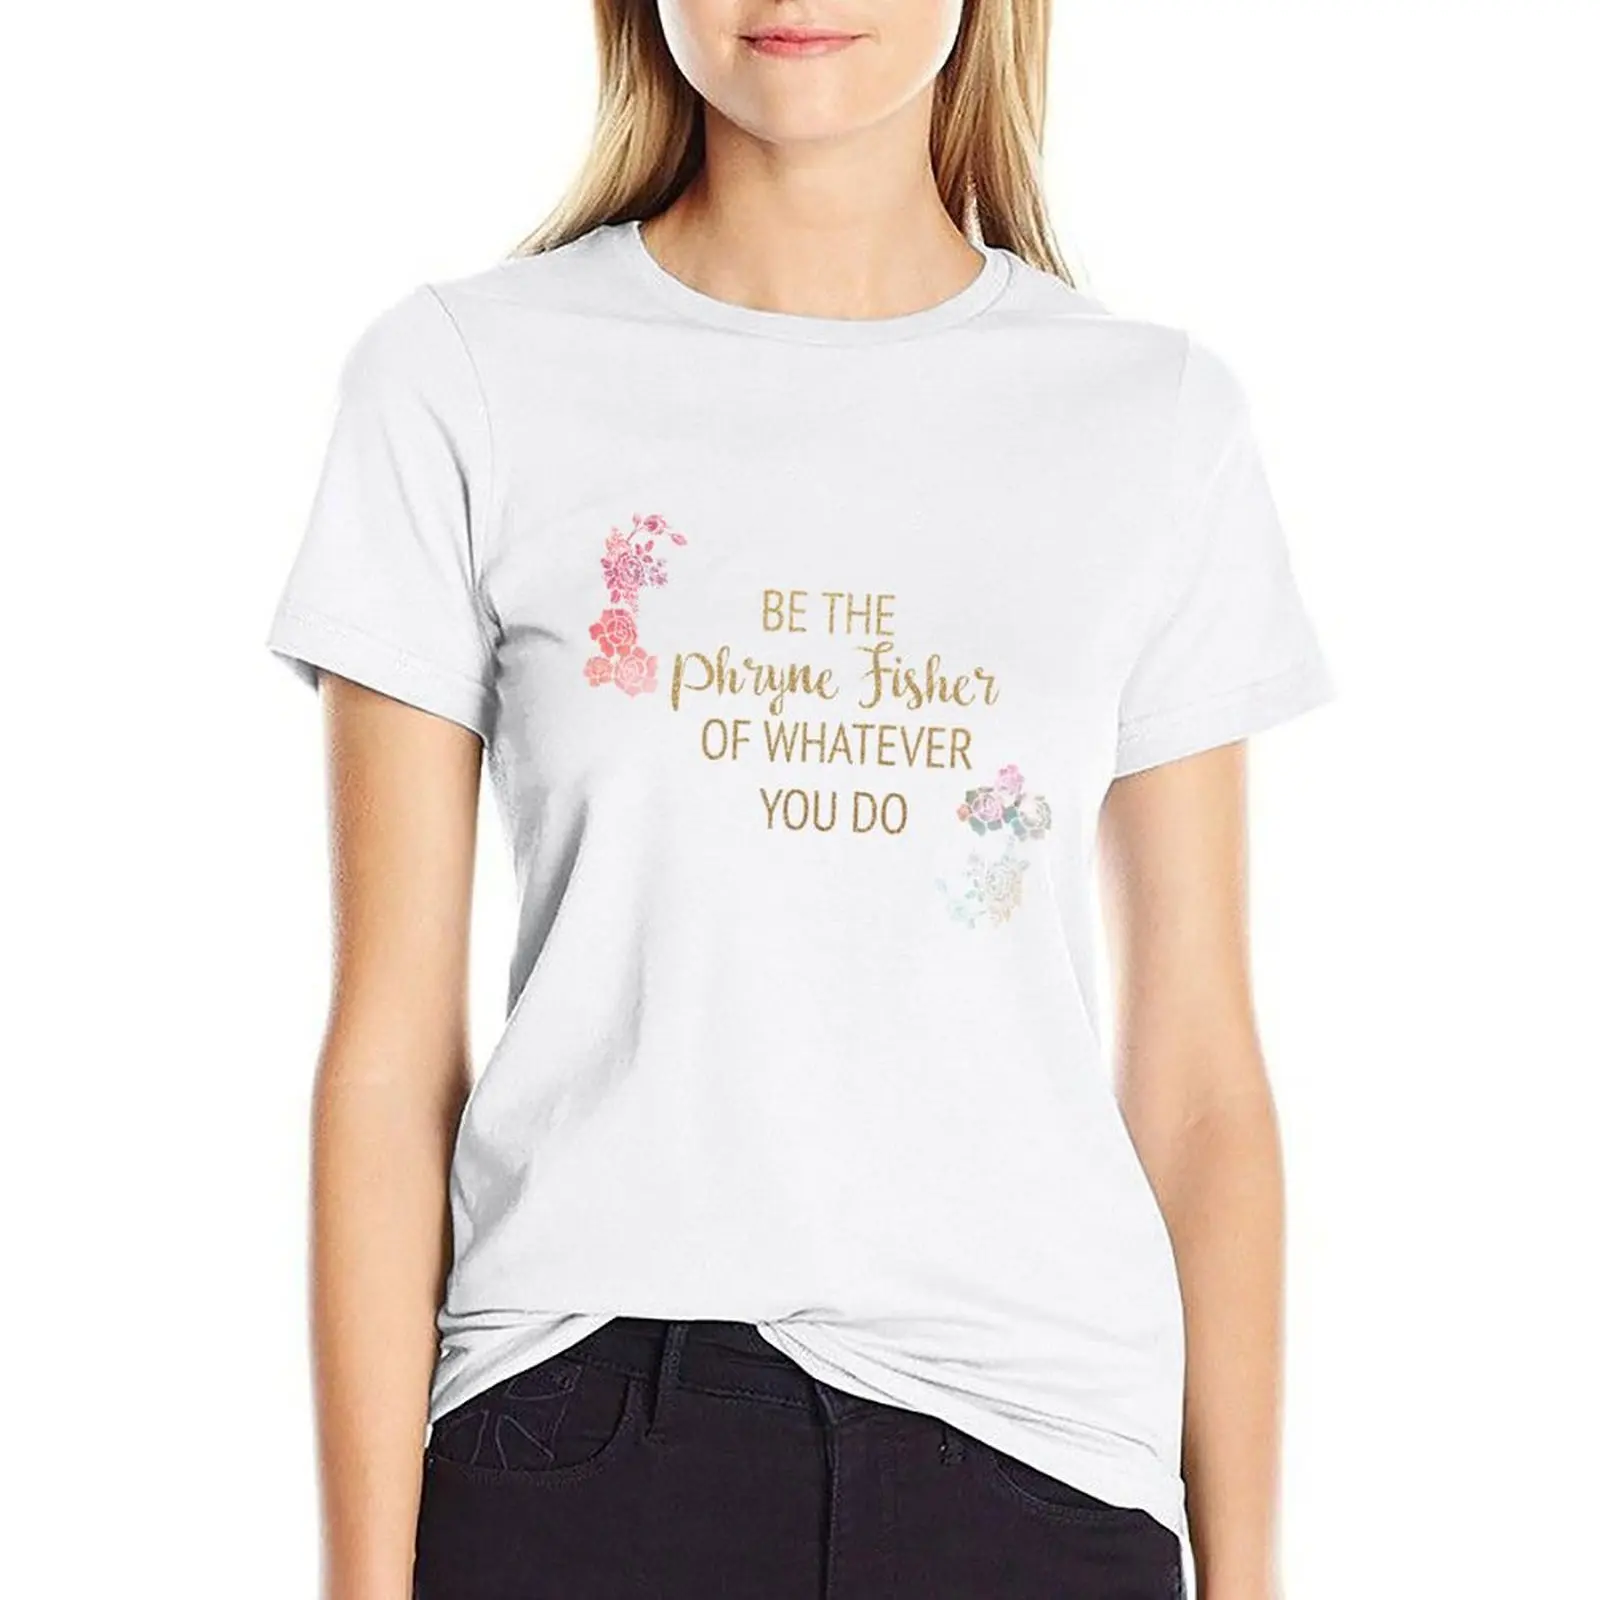 

Be the Phryne Fisher of Whatever You Do T-shirt Blouse oversized white t-shirts for Women